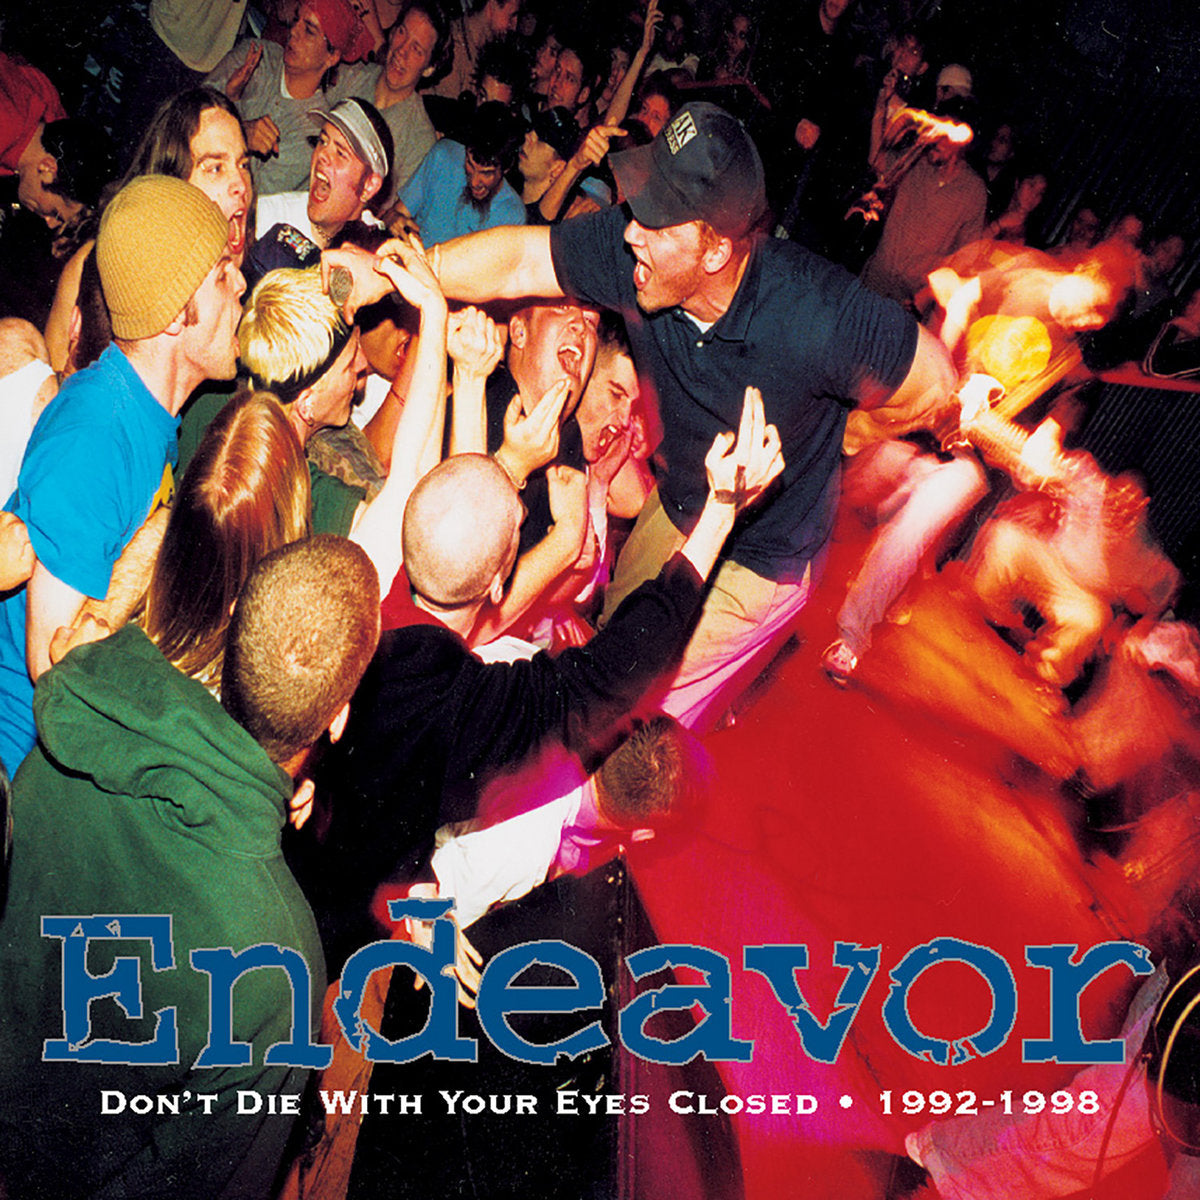 Endeavor "Don't Die With Your Eyes Closed (1992-1998)" CD